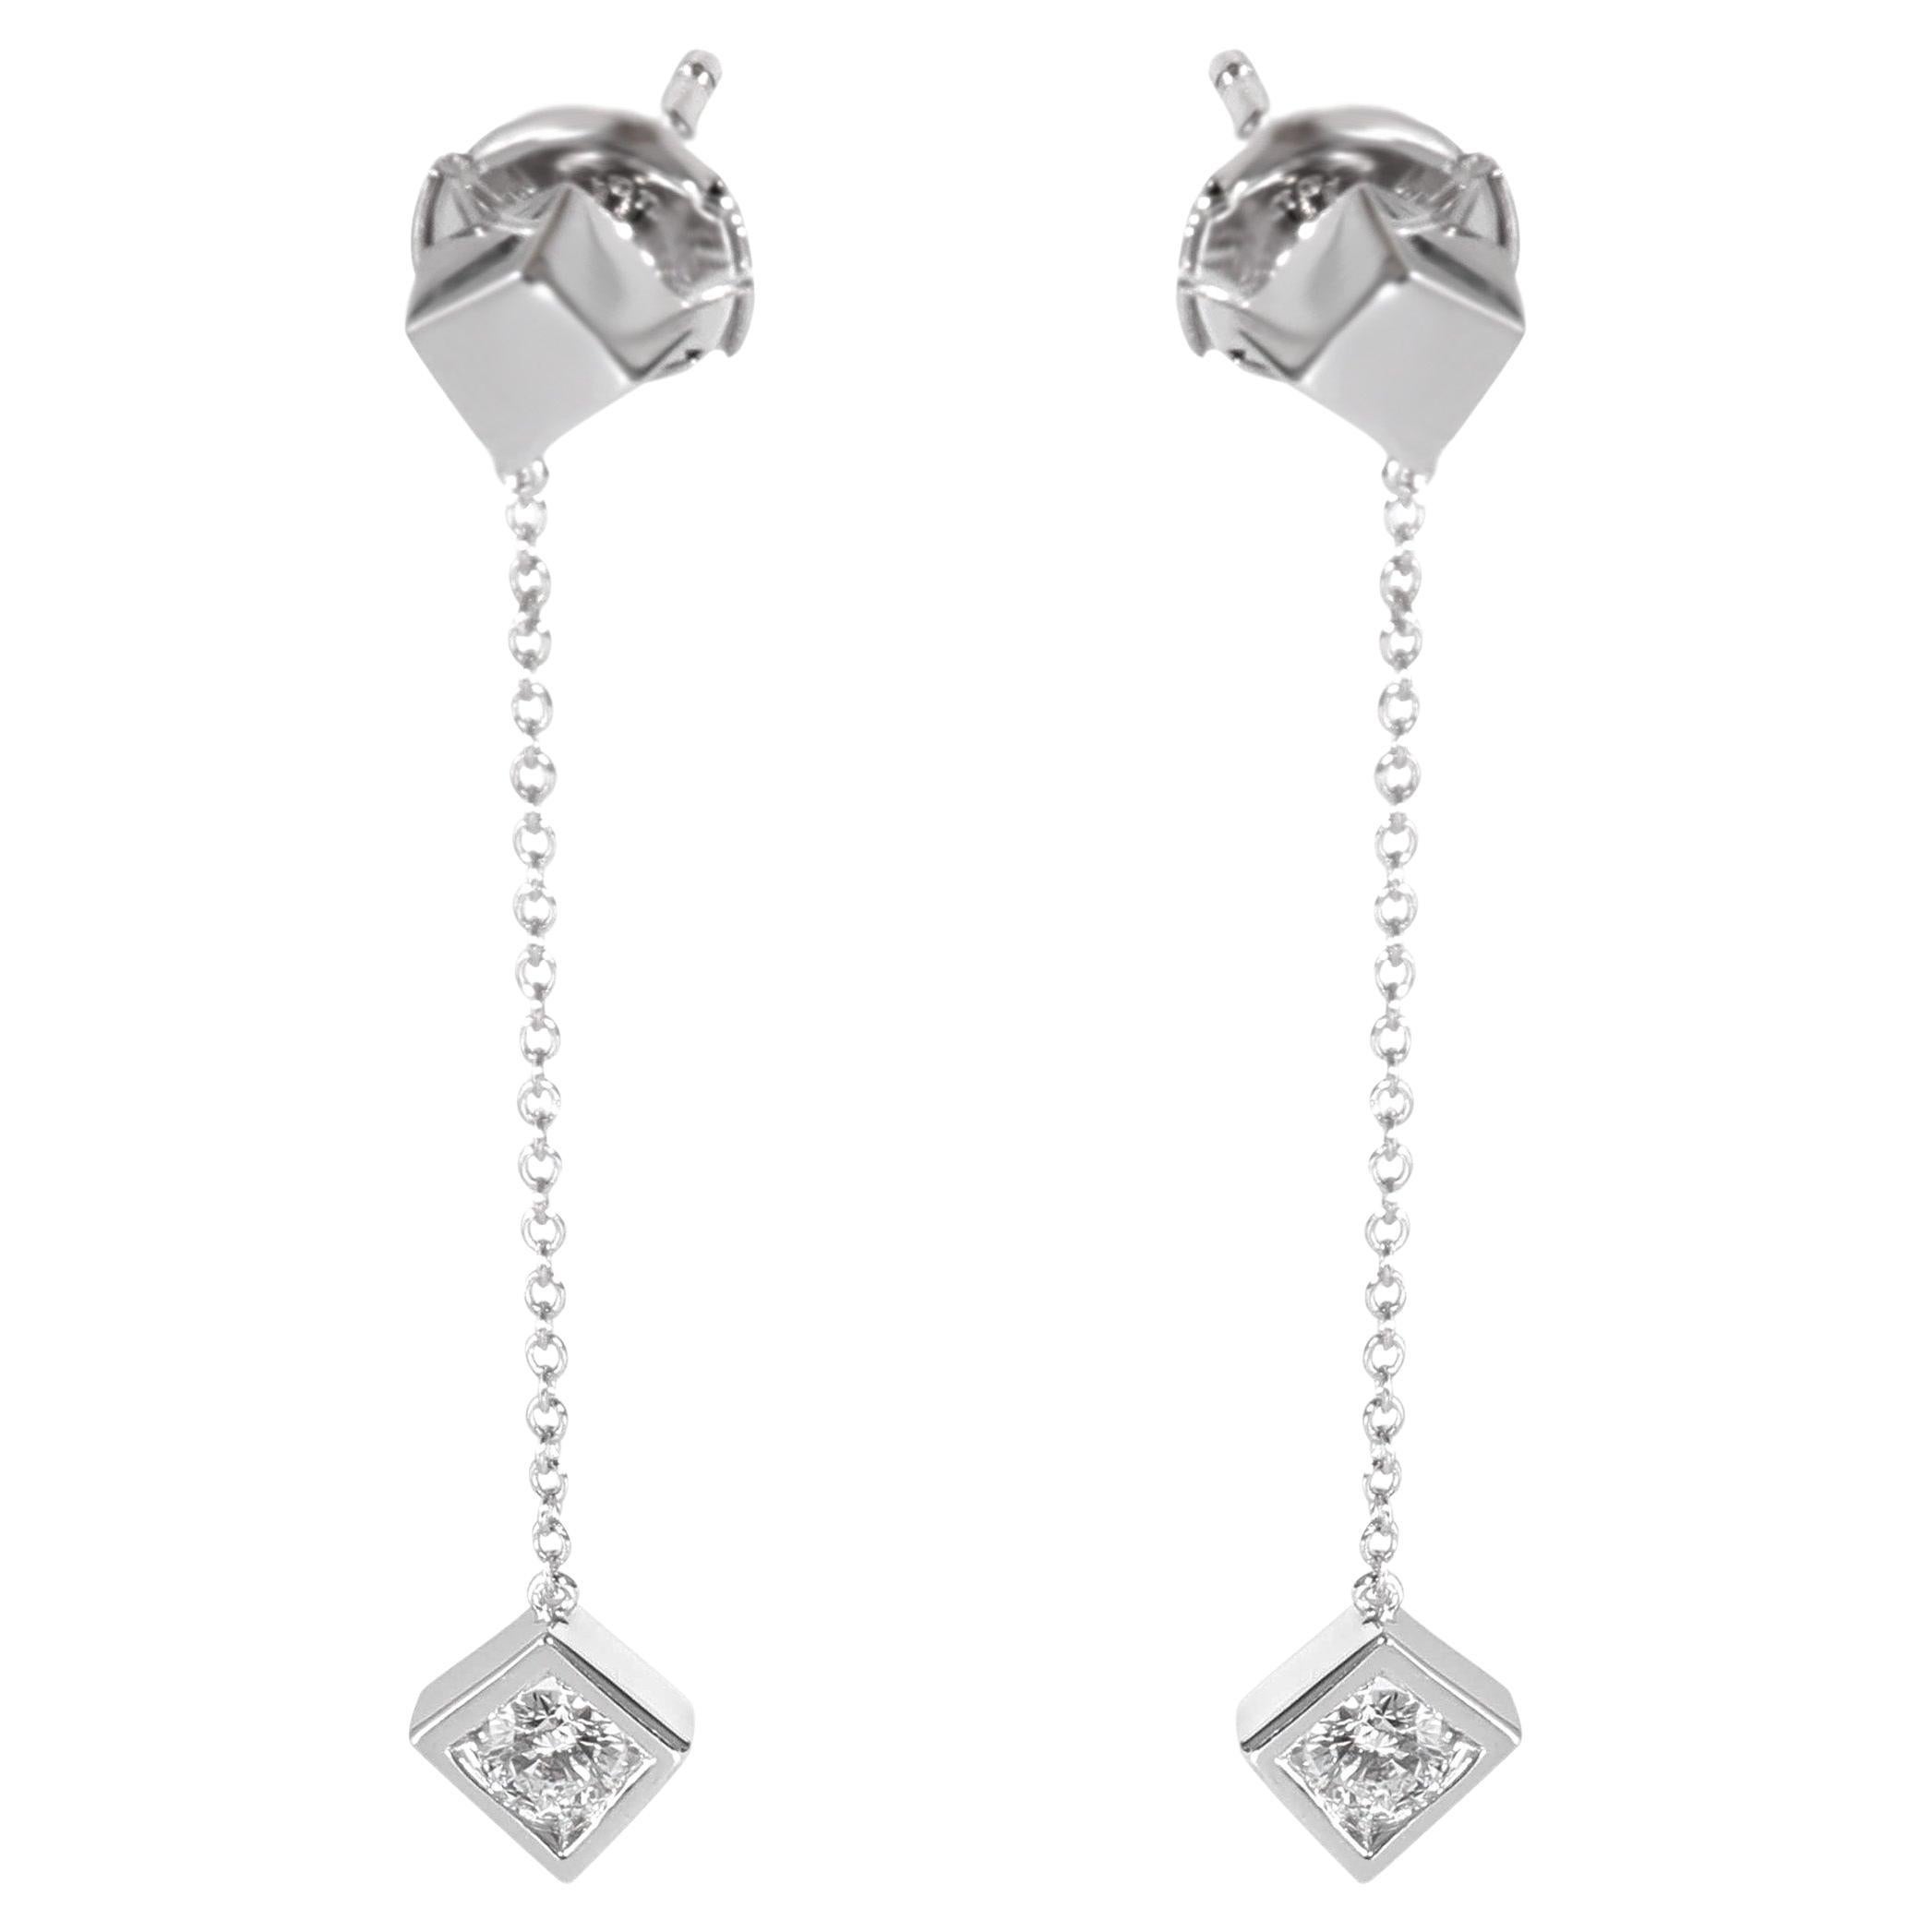 Tiffany & Co. Frank Gehry Torque Cube Drop Earring in 18k White Gold 0.40 CTW